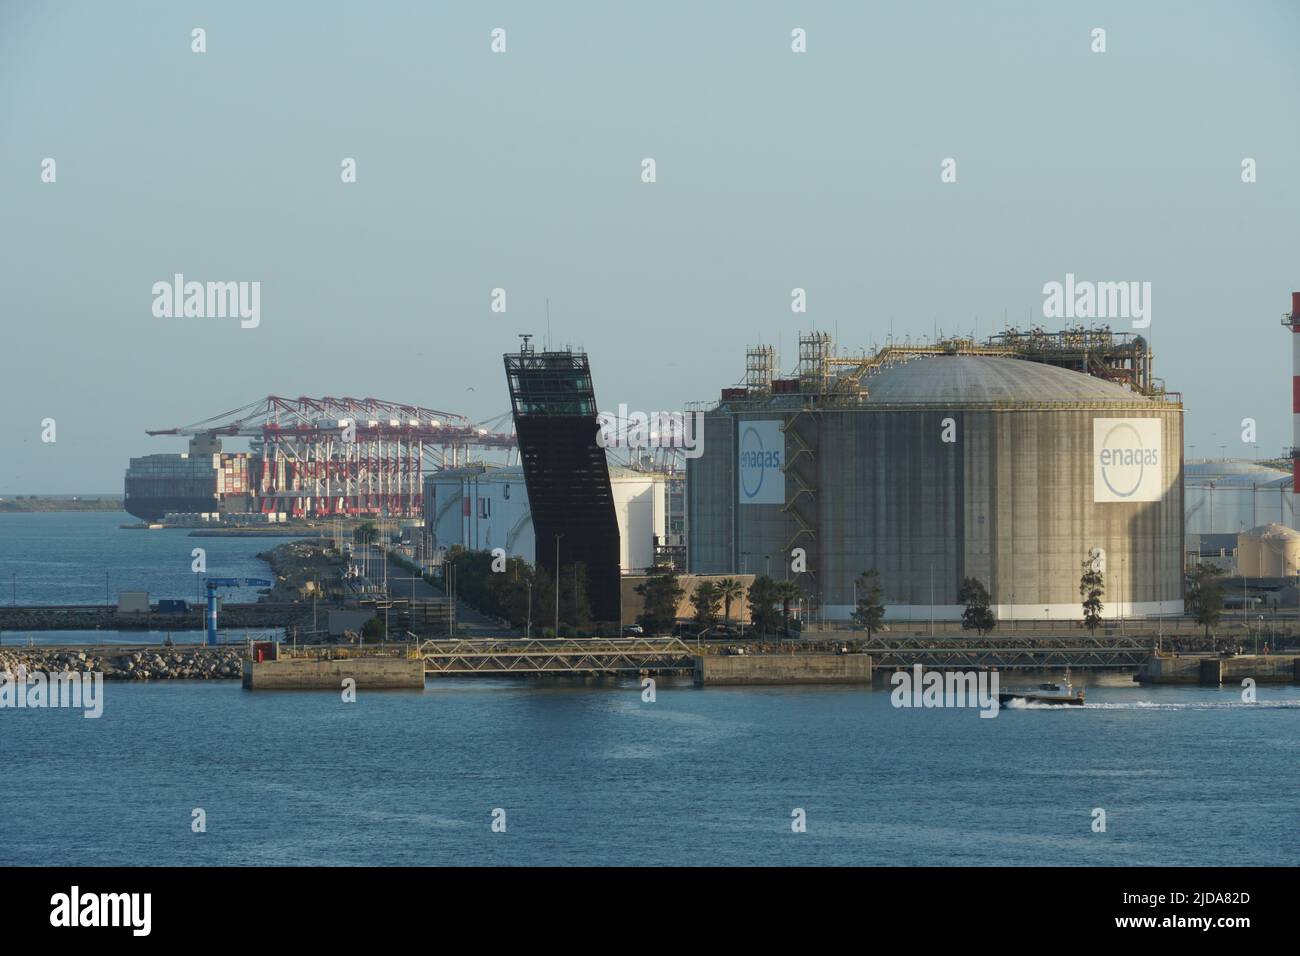 View on liquefied natural gas regasification terminal Enagas in Barcelona form container terminal. Stock Photo